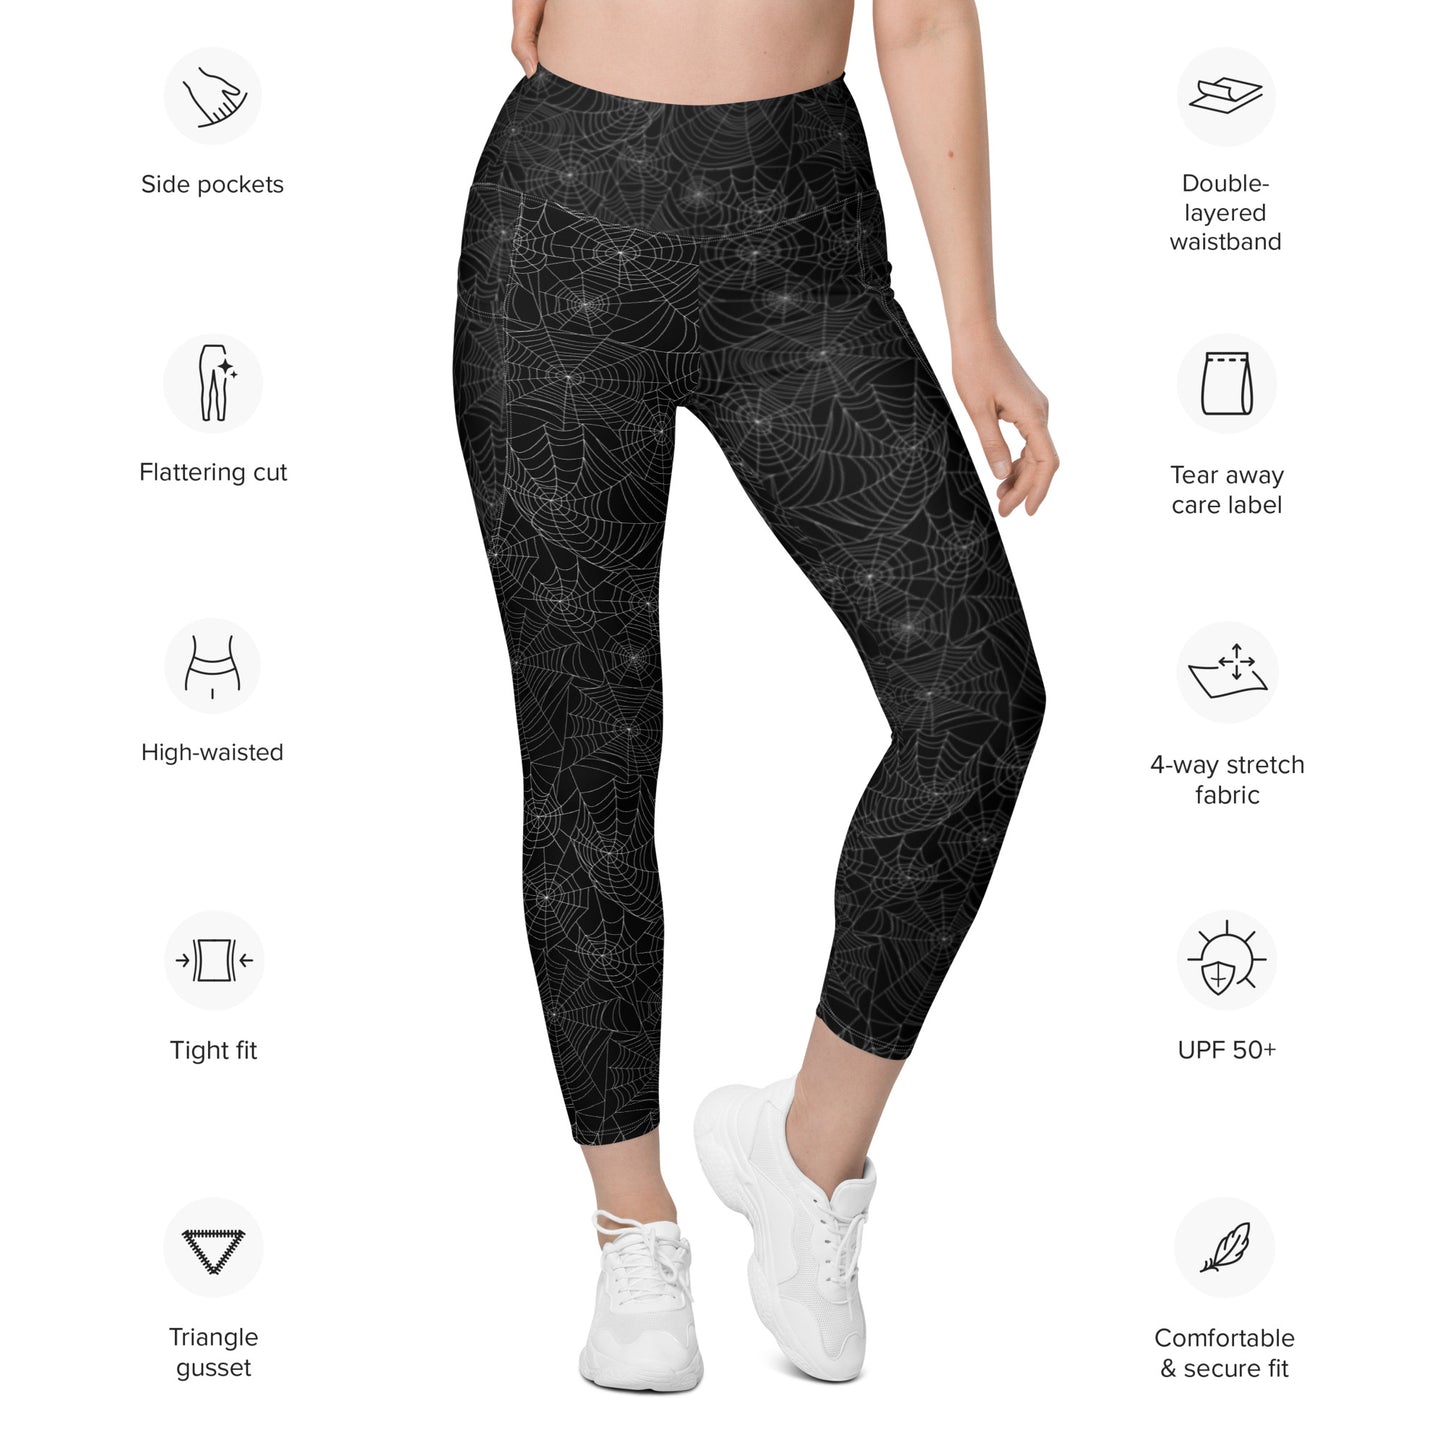 Spiderweb Leggings with pockets, high waisted, Halloween yoga pants, holiday exercise pants with pockets, pocket leggings, sizes 2xs - 6xl